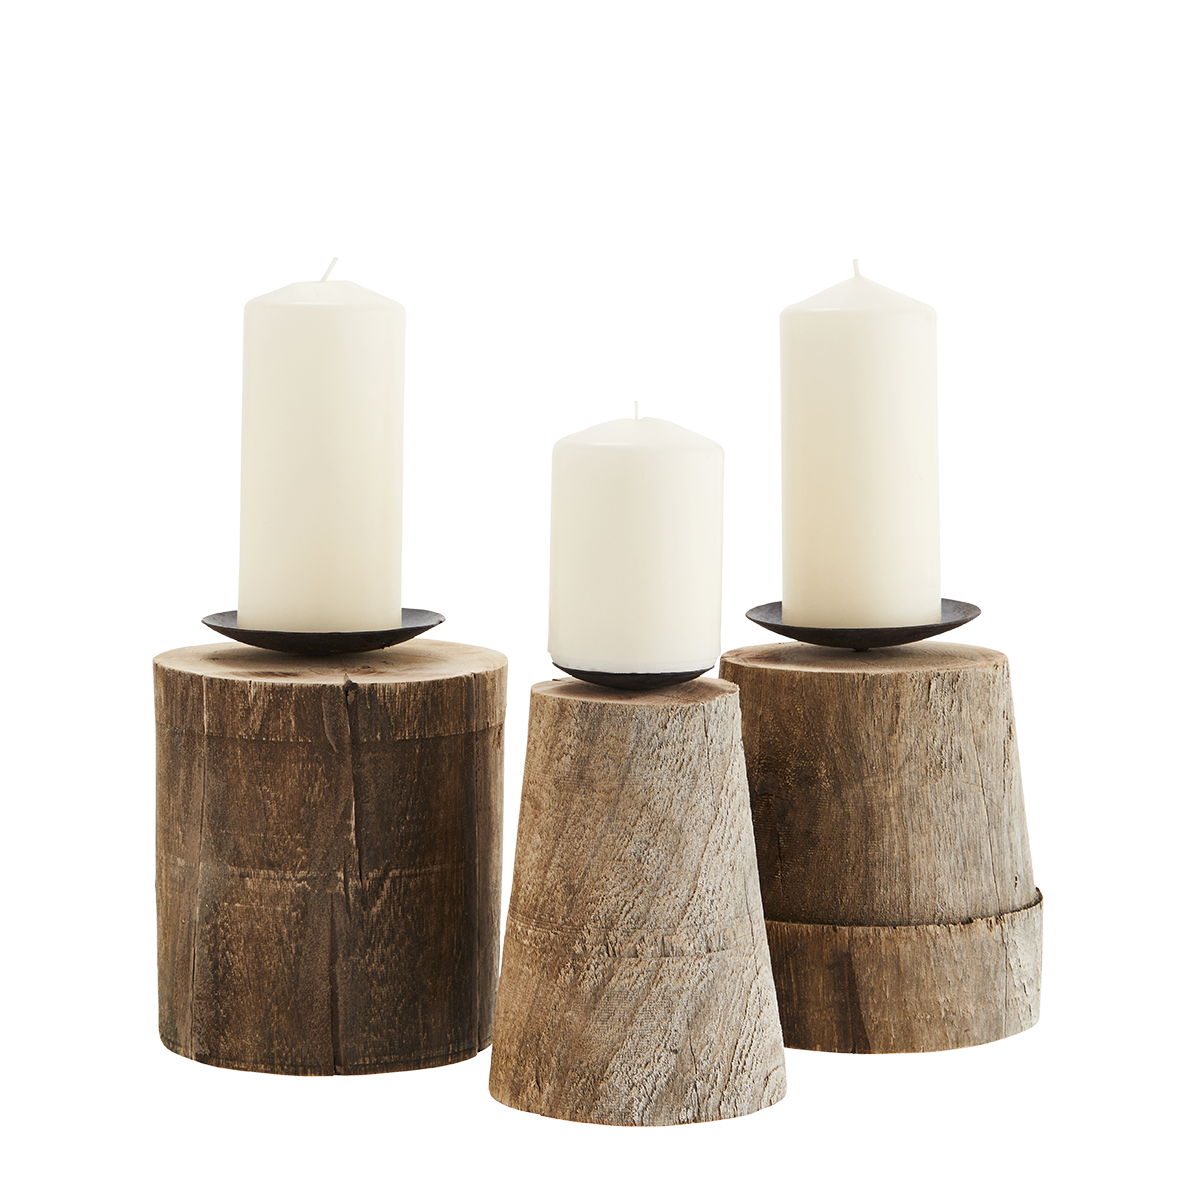 Wooden candle stands